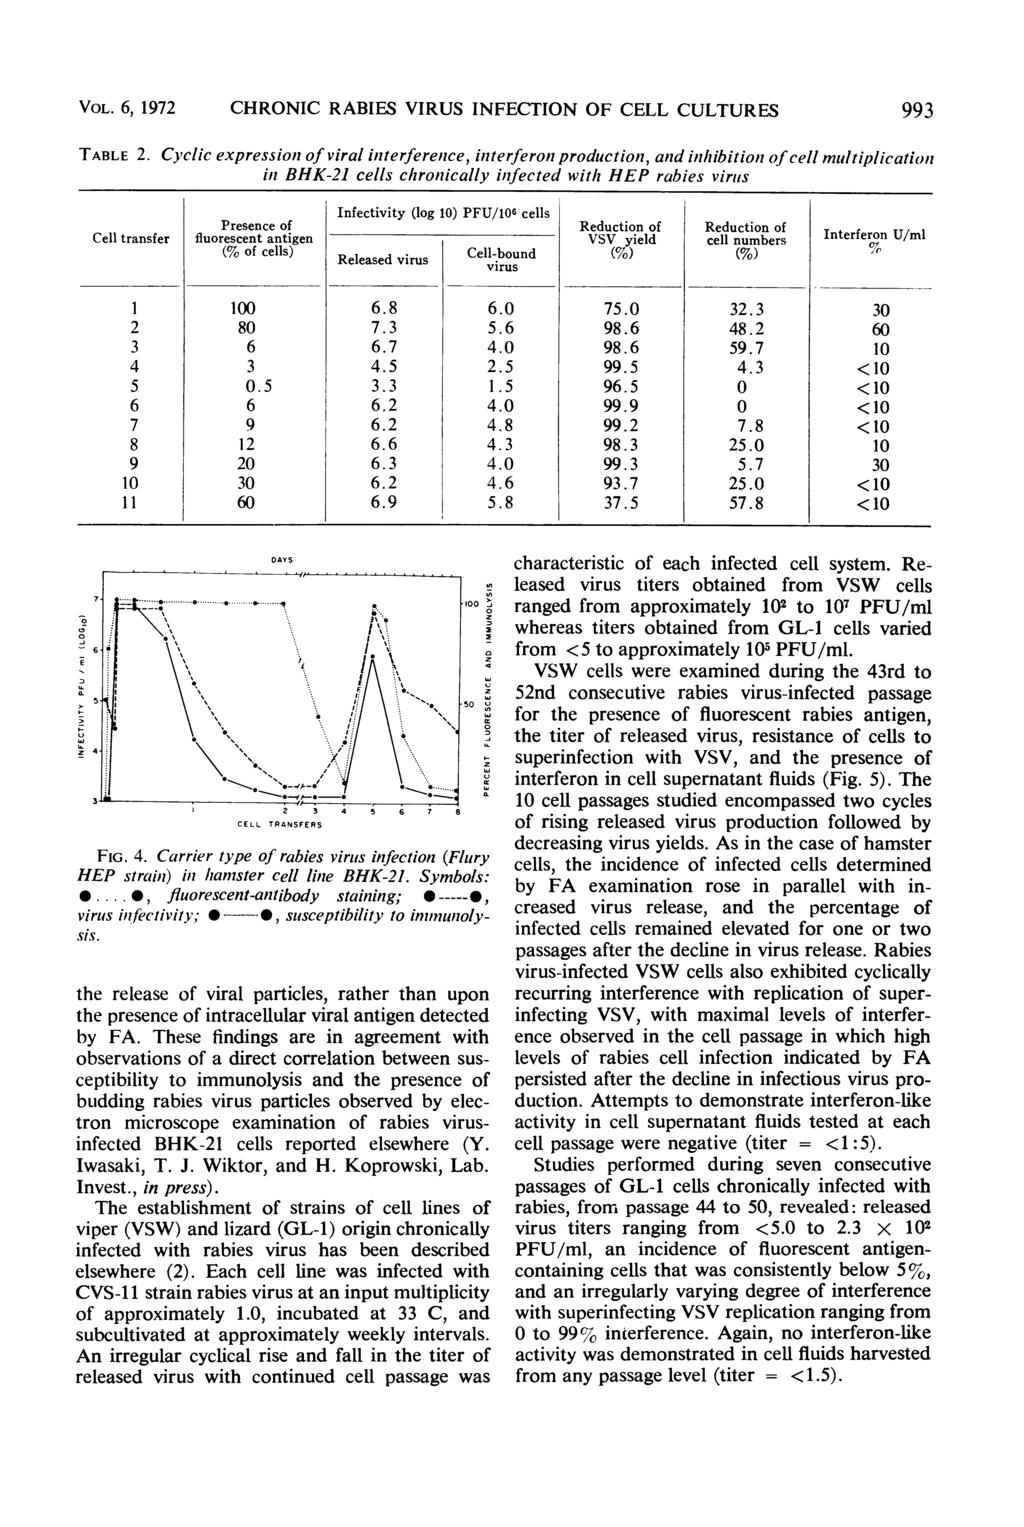 VOL. 6, 1972 CHRONIC RABIES VIRUS INFECTION OF CELL CULTURES TABLE 2.